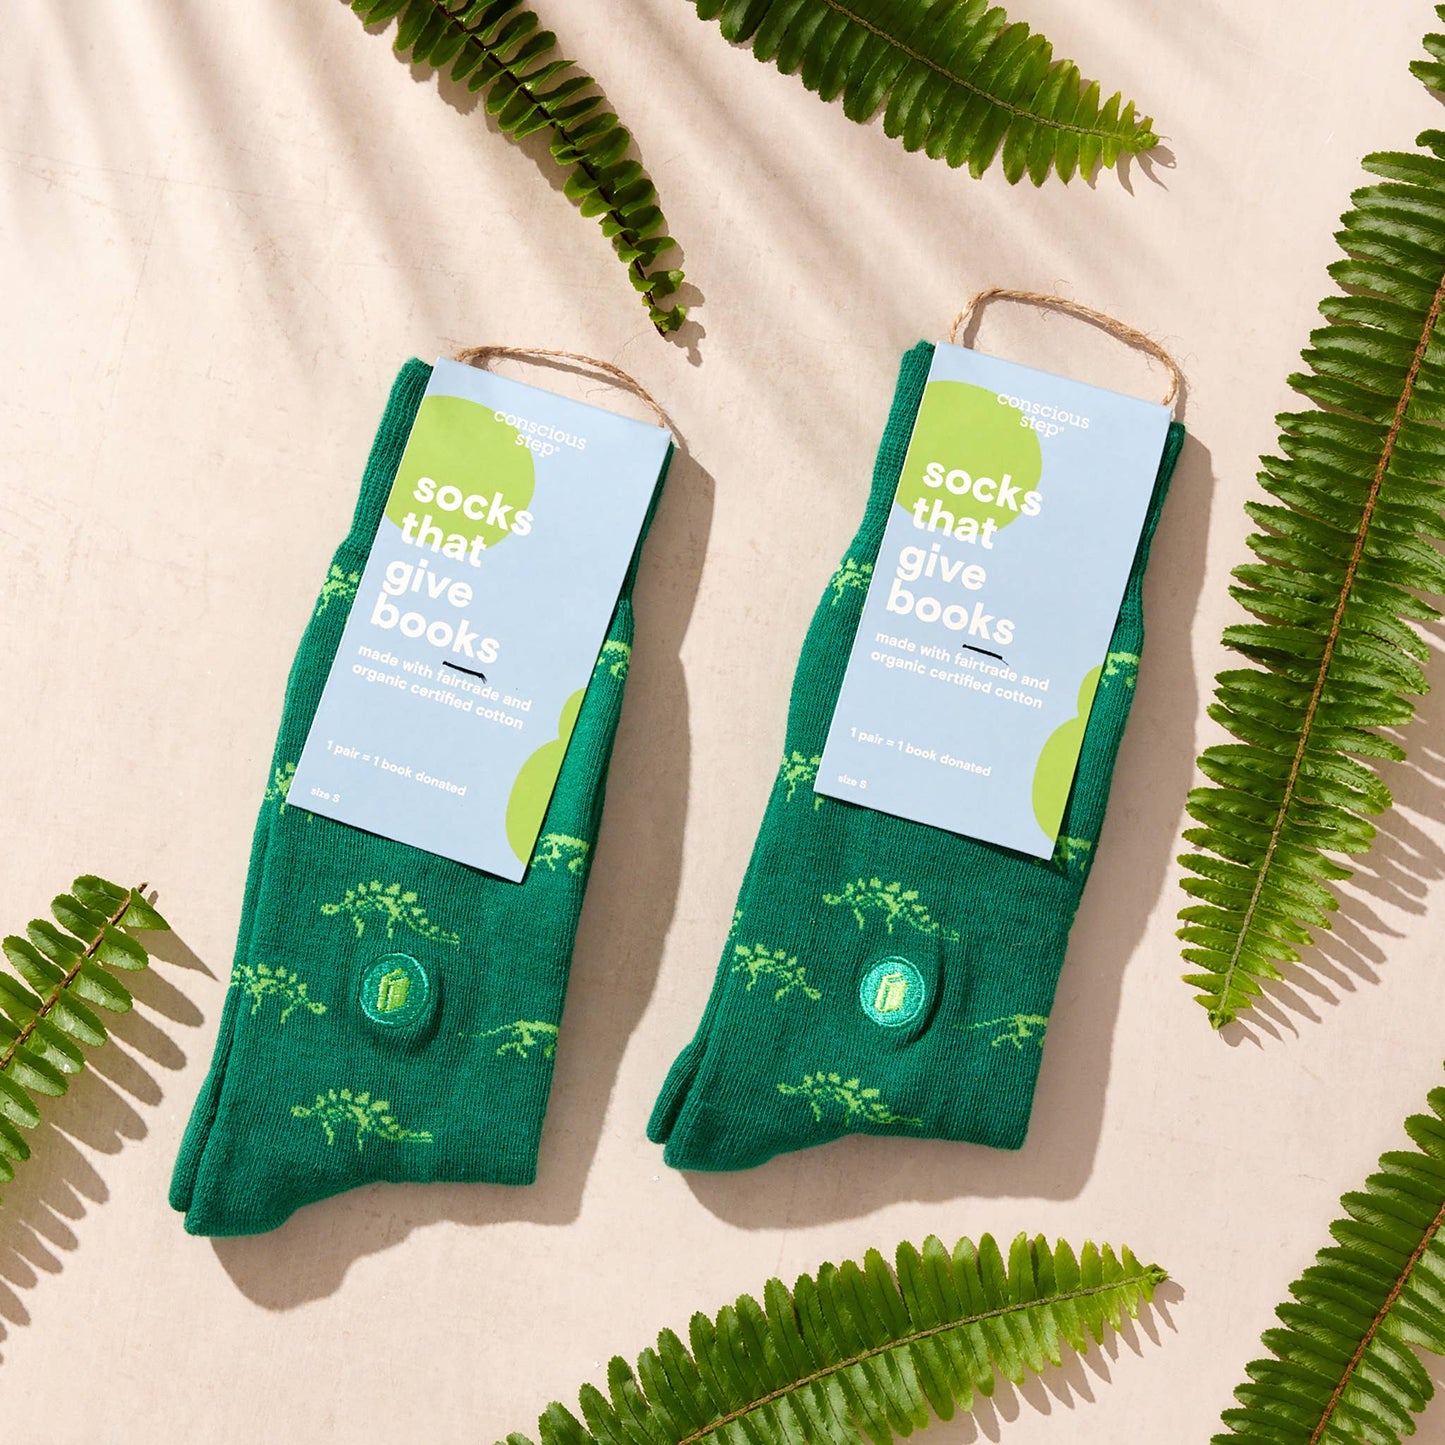 Conscious Step - Socks that Give Books  (Green Dinosaurs)